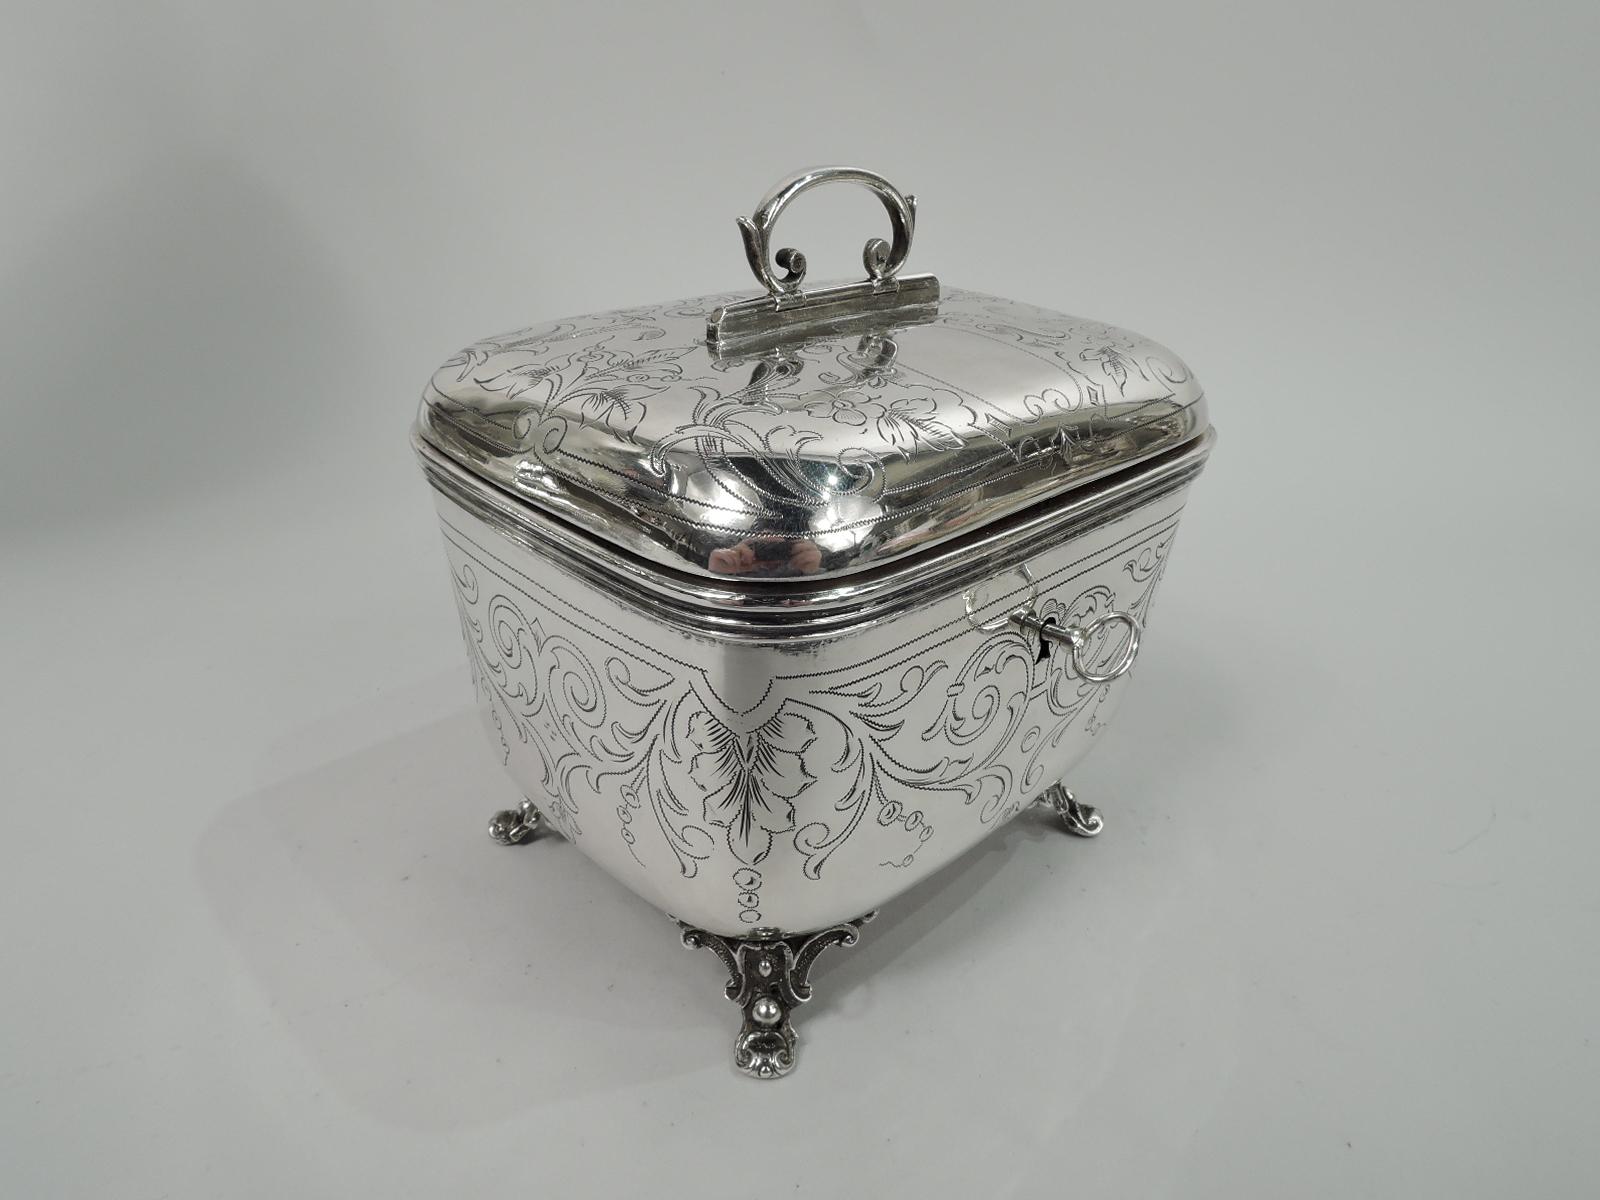 Austrian 800 silver casket, ca 1910. Rectangular with gently tapering sides and curved corners. Cover hinged and raised with hinged and capped c-scroll handle. Engraved leafing scrollwork, and scrolled oval cartouche (vacant) on cover top. Rests on